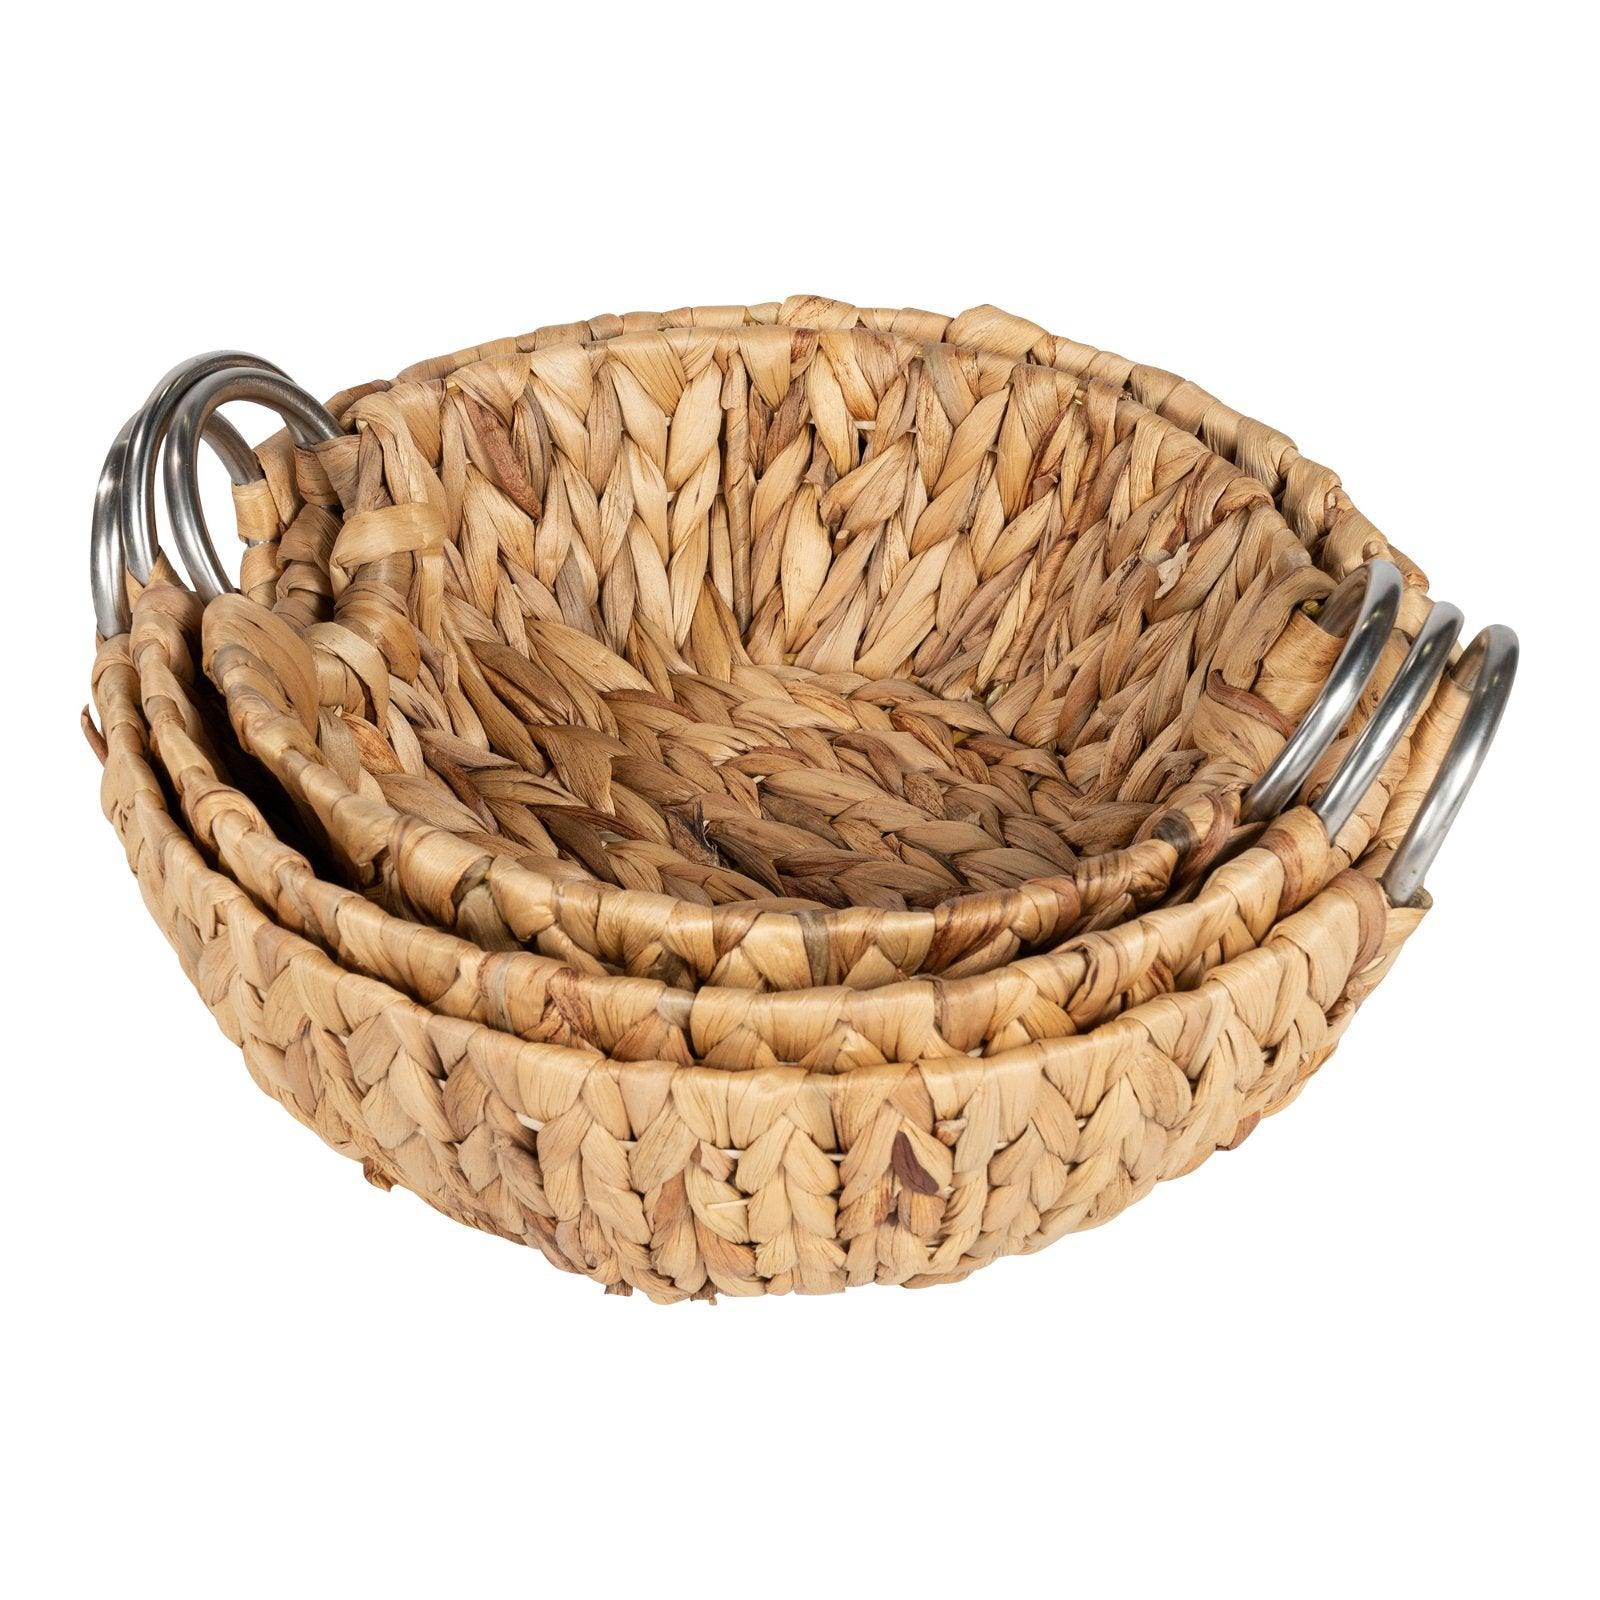 View Set of 3 Round Raffia Natural Baskets With Metal Handles information